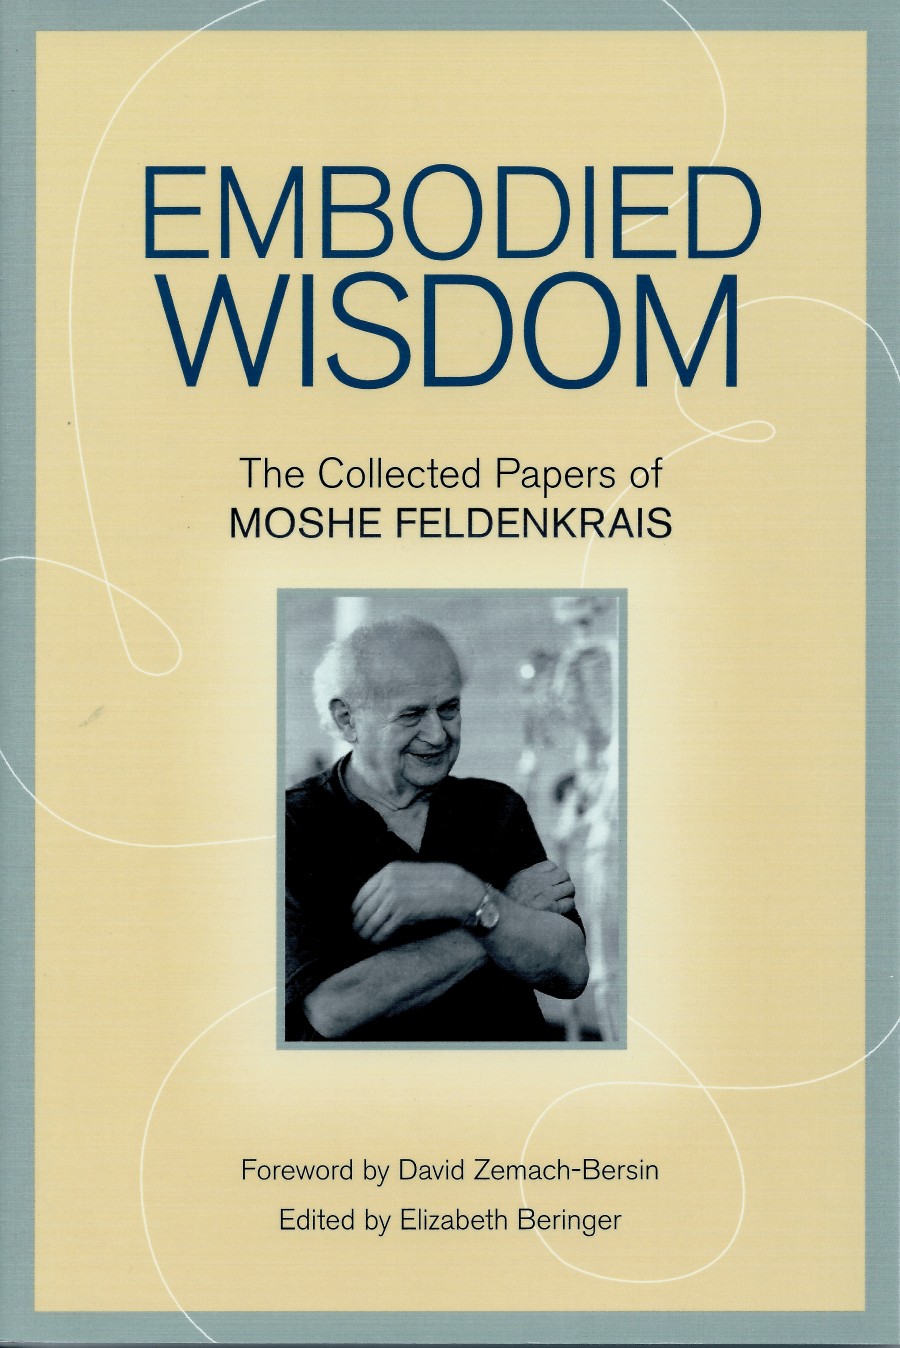 Embodied Wisdom - The Collected Papers of Moshe Feldenkrais